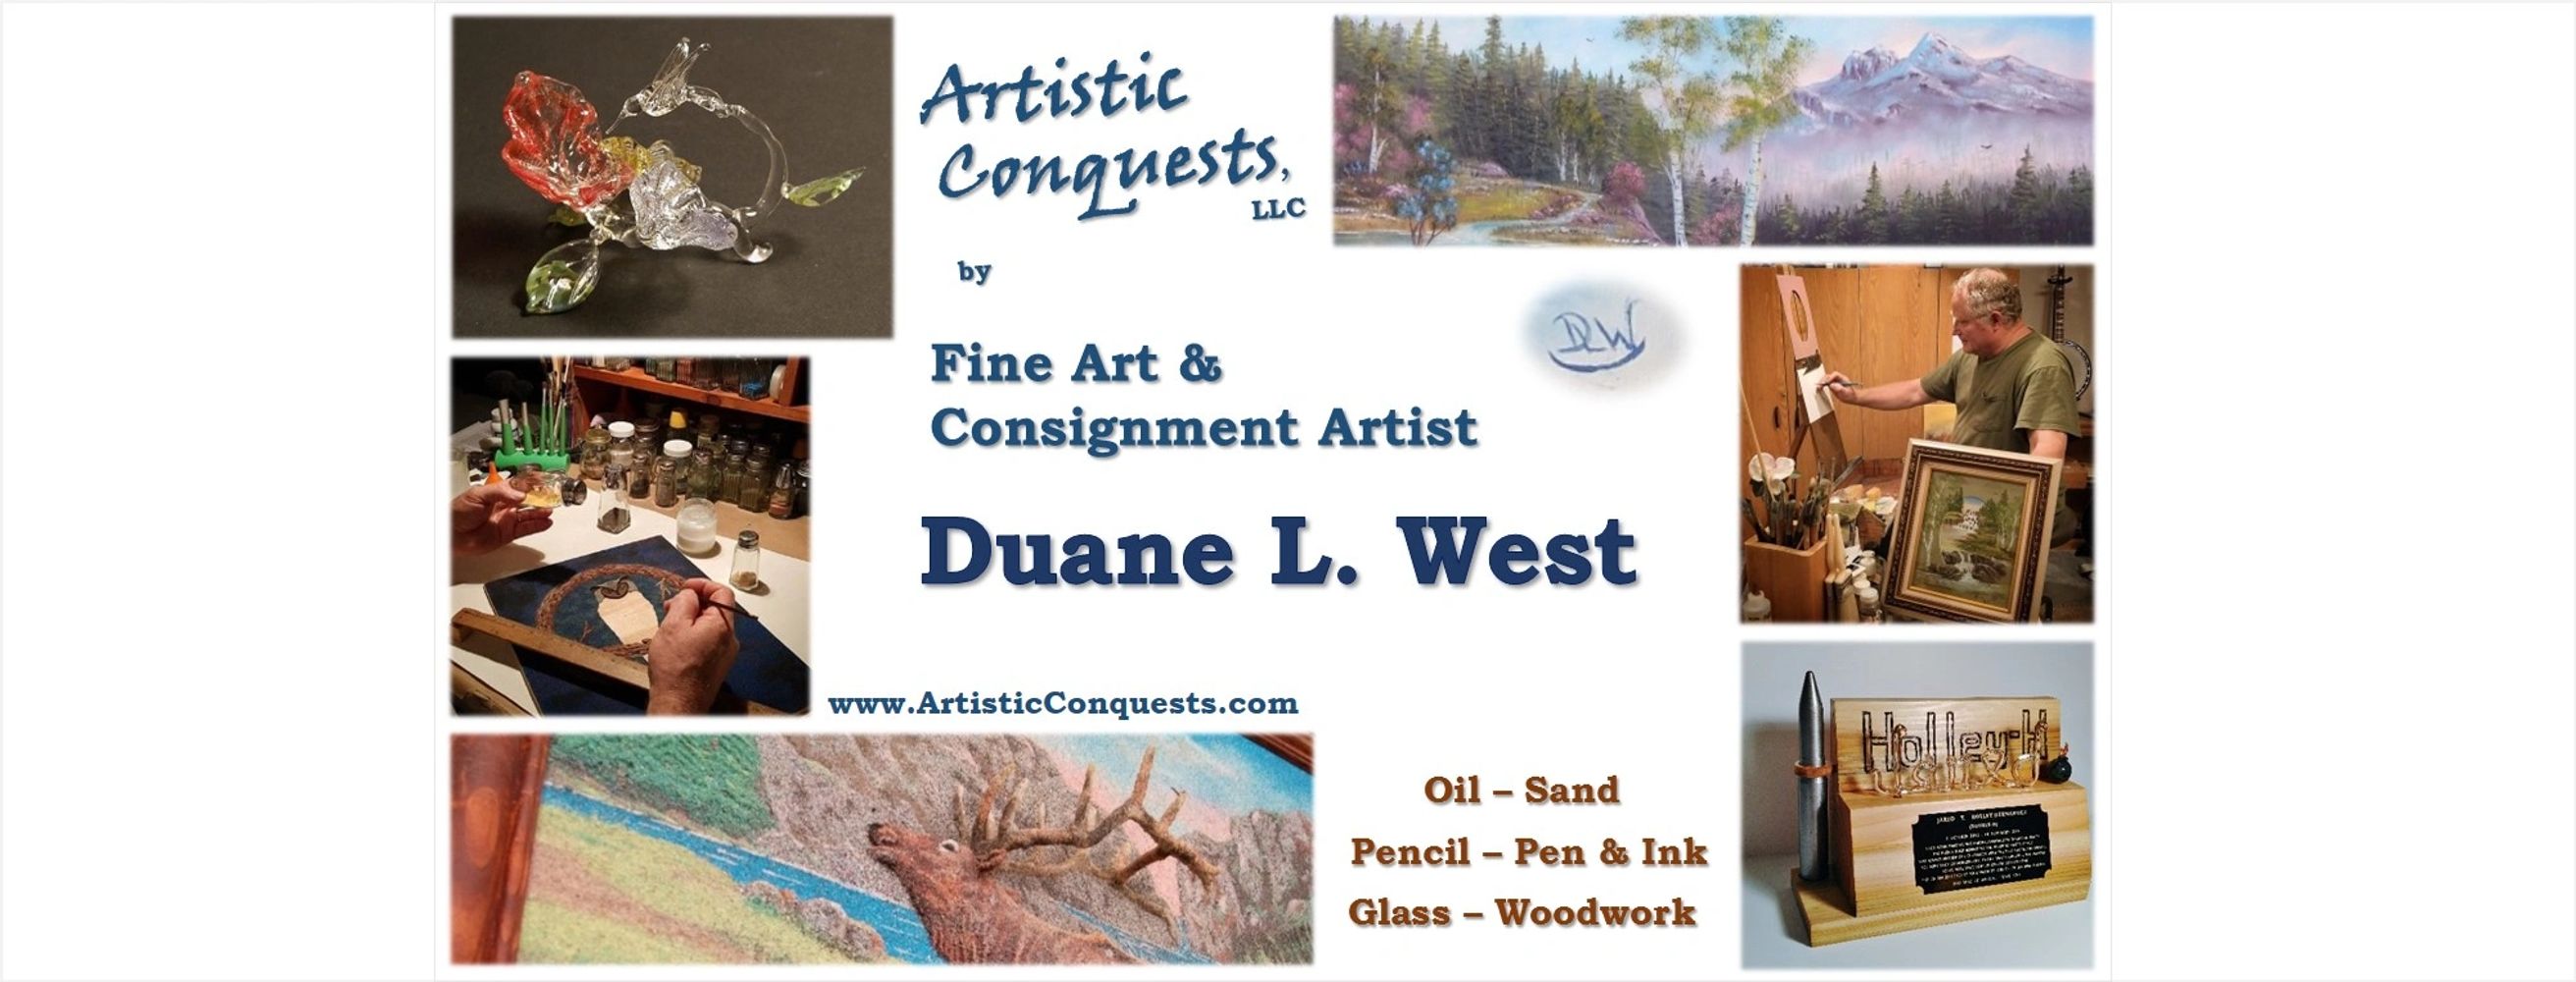 Collage of artwork by Duane L. West.